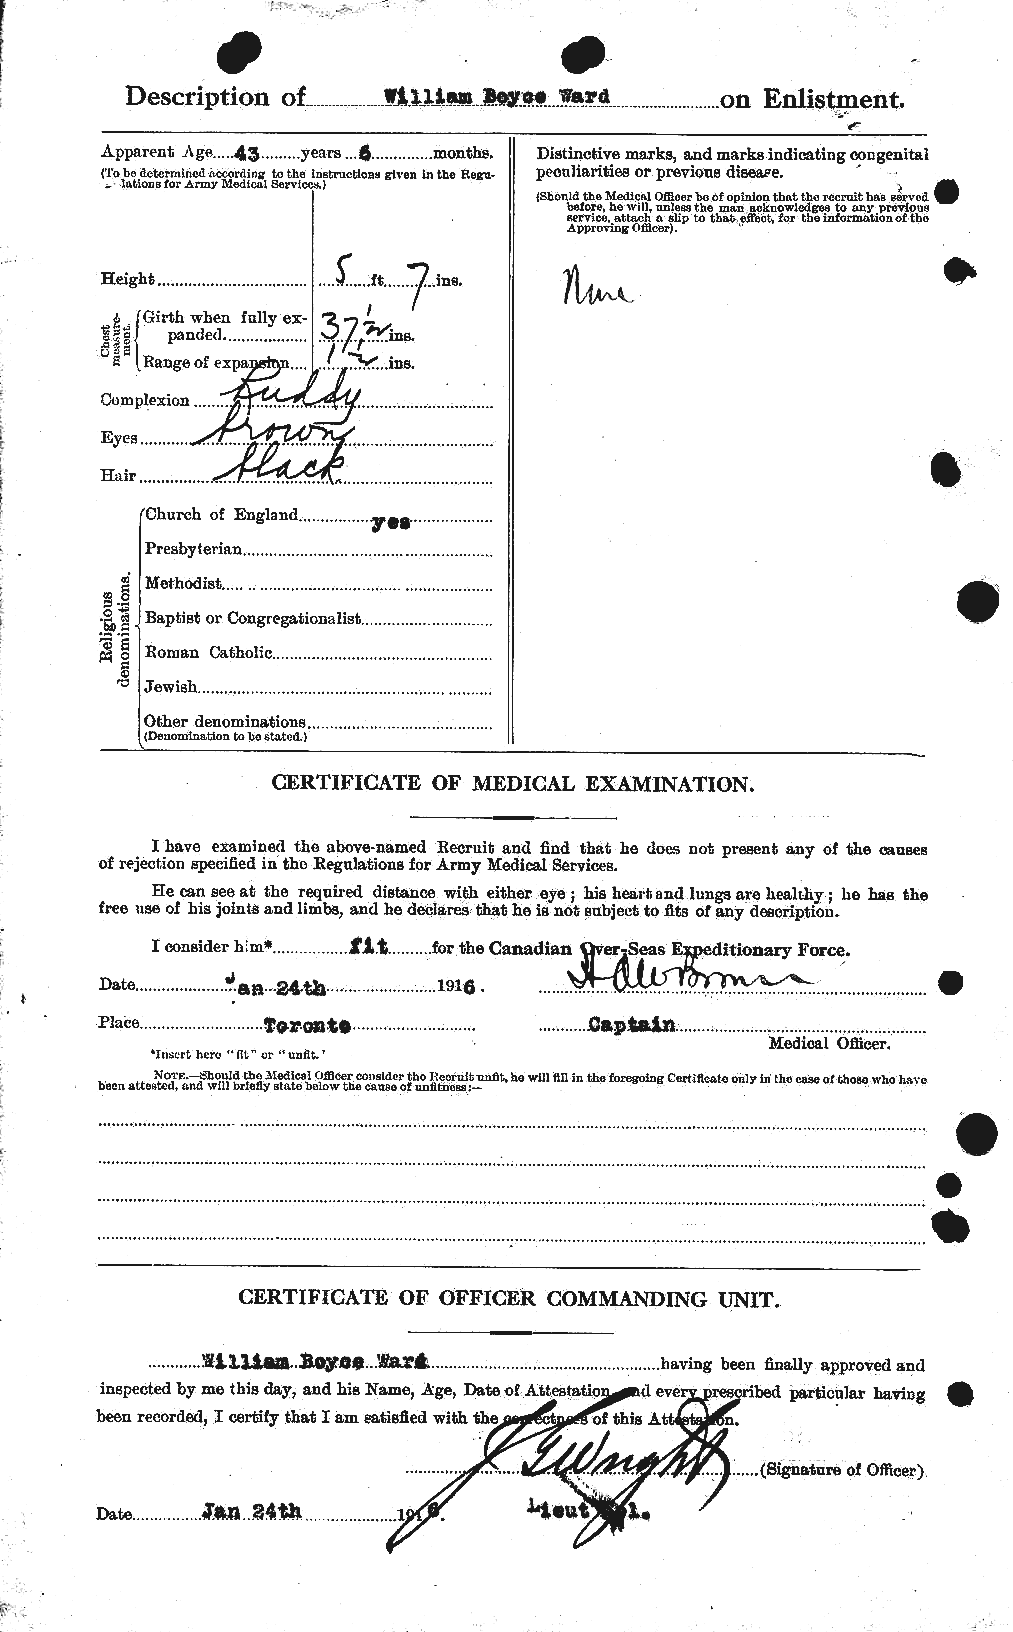 Personnel Records of the First World War - CEF 659803b